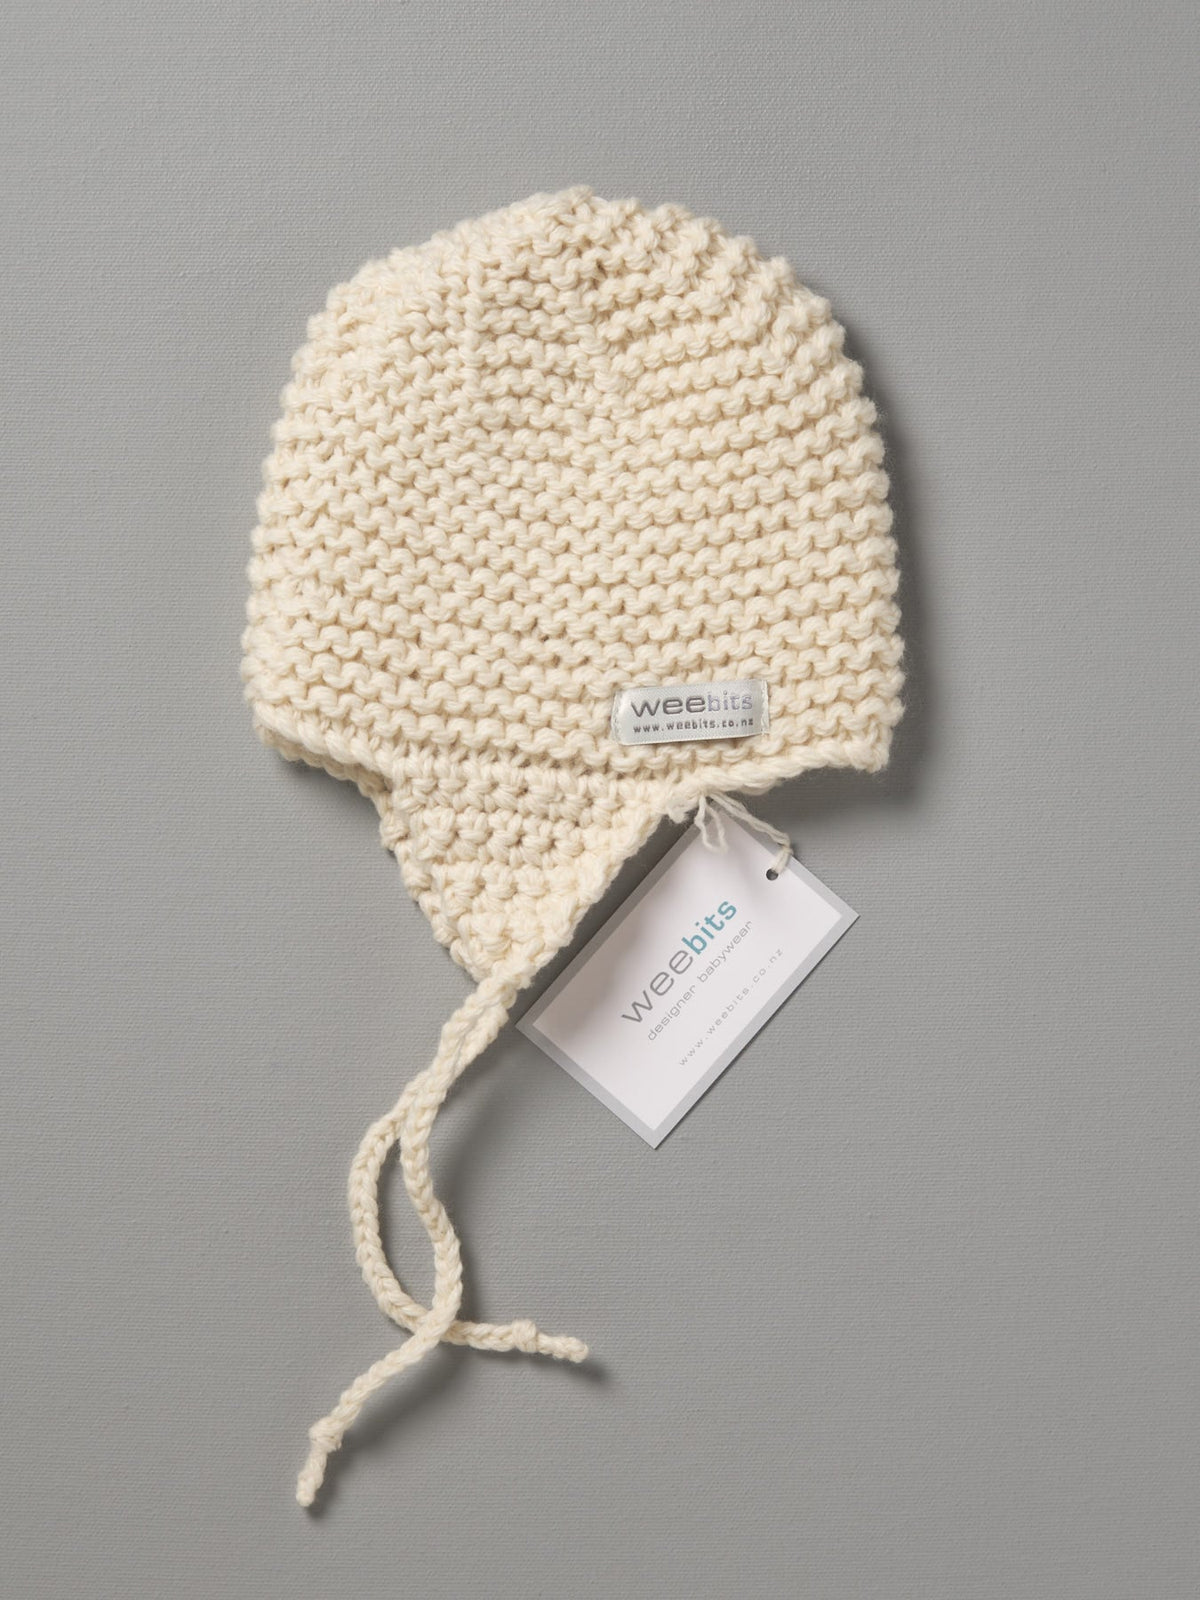 A white Hand Knitted Chunky Knit Hat - Natural with a tag on it. Brand Name: Weebits